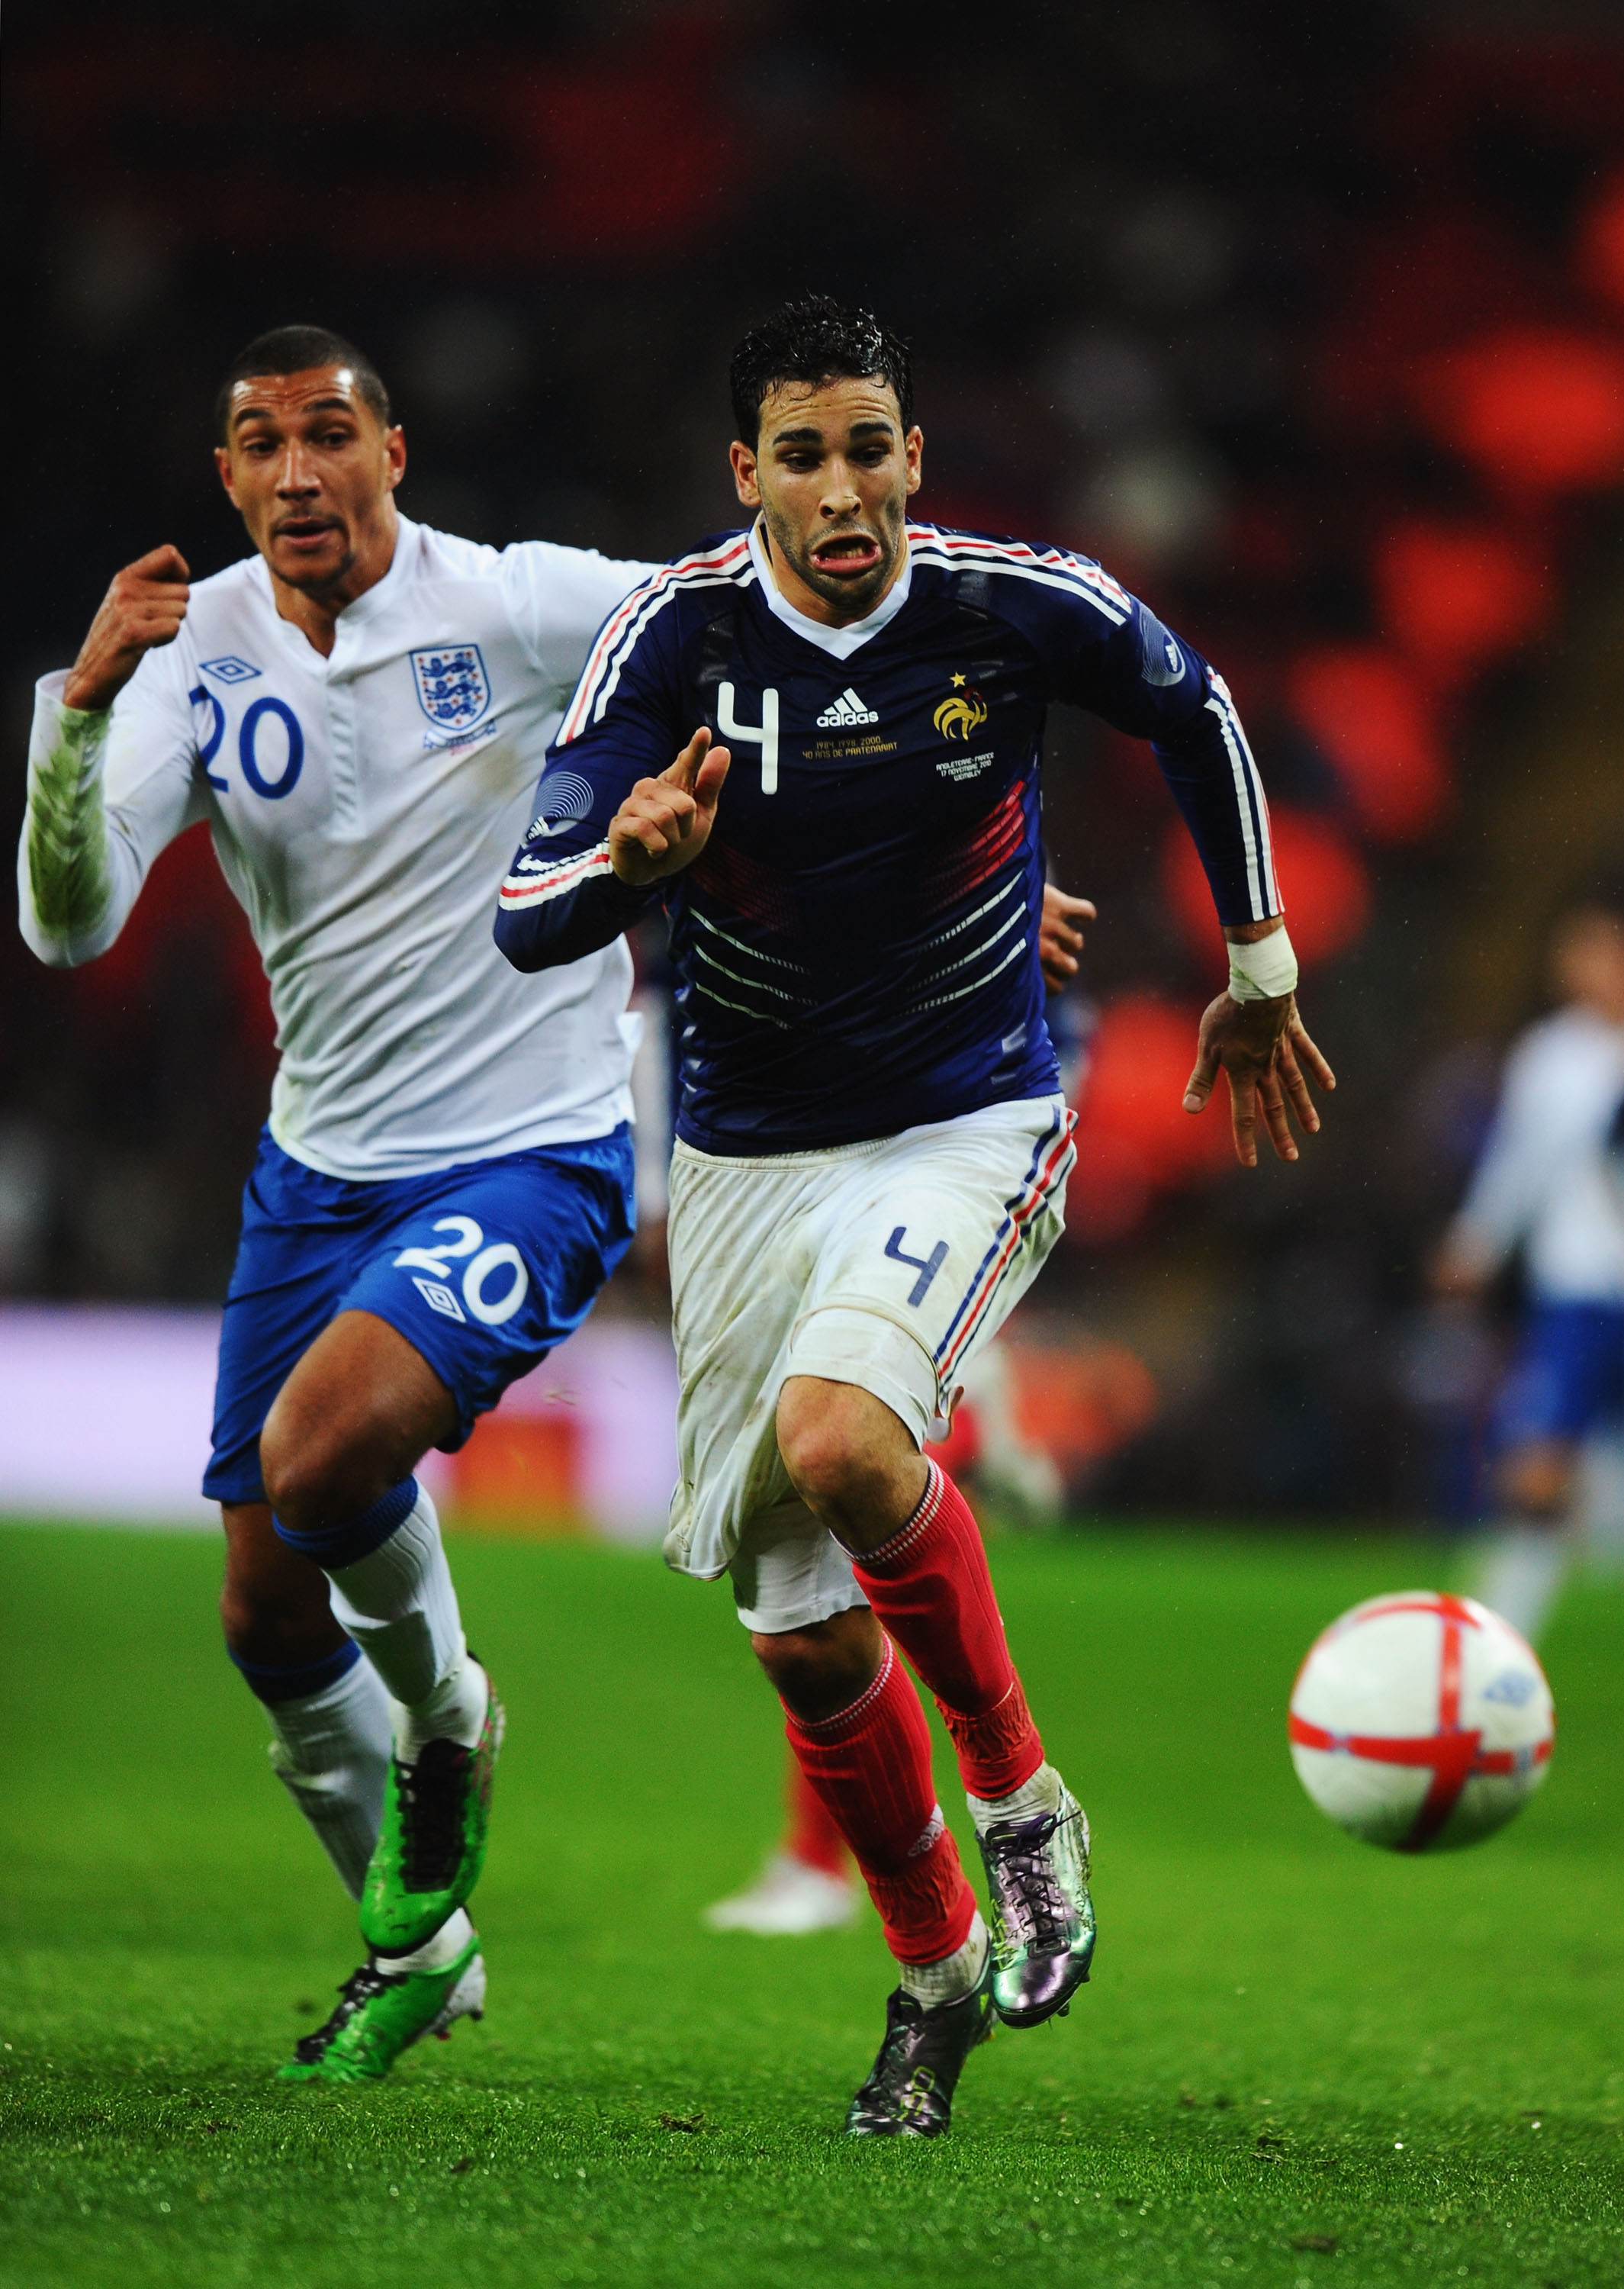 LONDON, ENGLAND - NOVEMBER 17:  Jay Bothroyd of England chases Adil Rami of France during the international friendly match between England and France at Wembley Stadium on November 17, 2010 in London, England.  (Photo by Mike Hewitt/Getty Images)